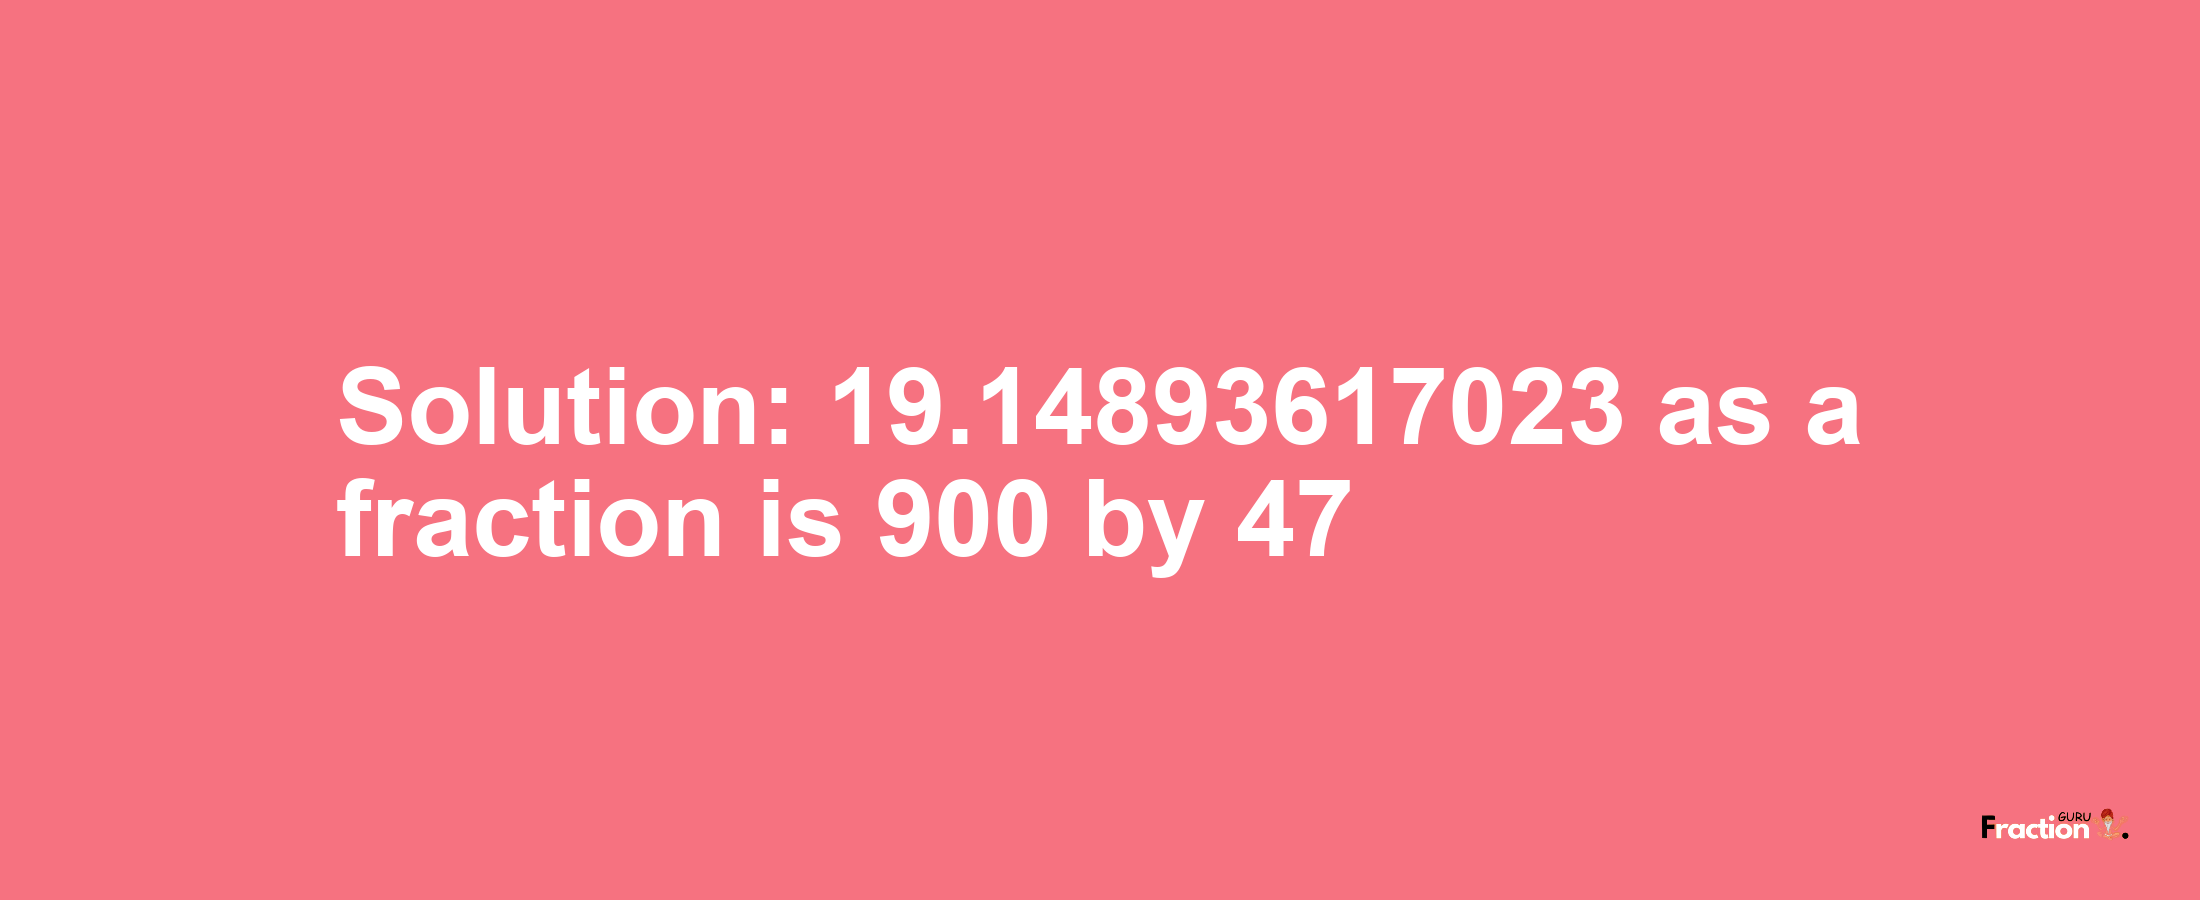 Solution:19.14893617023 as a fraction is 900/47